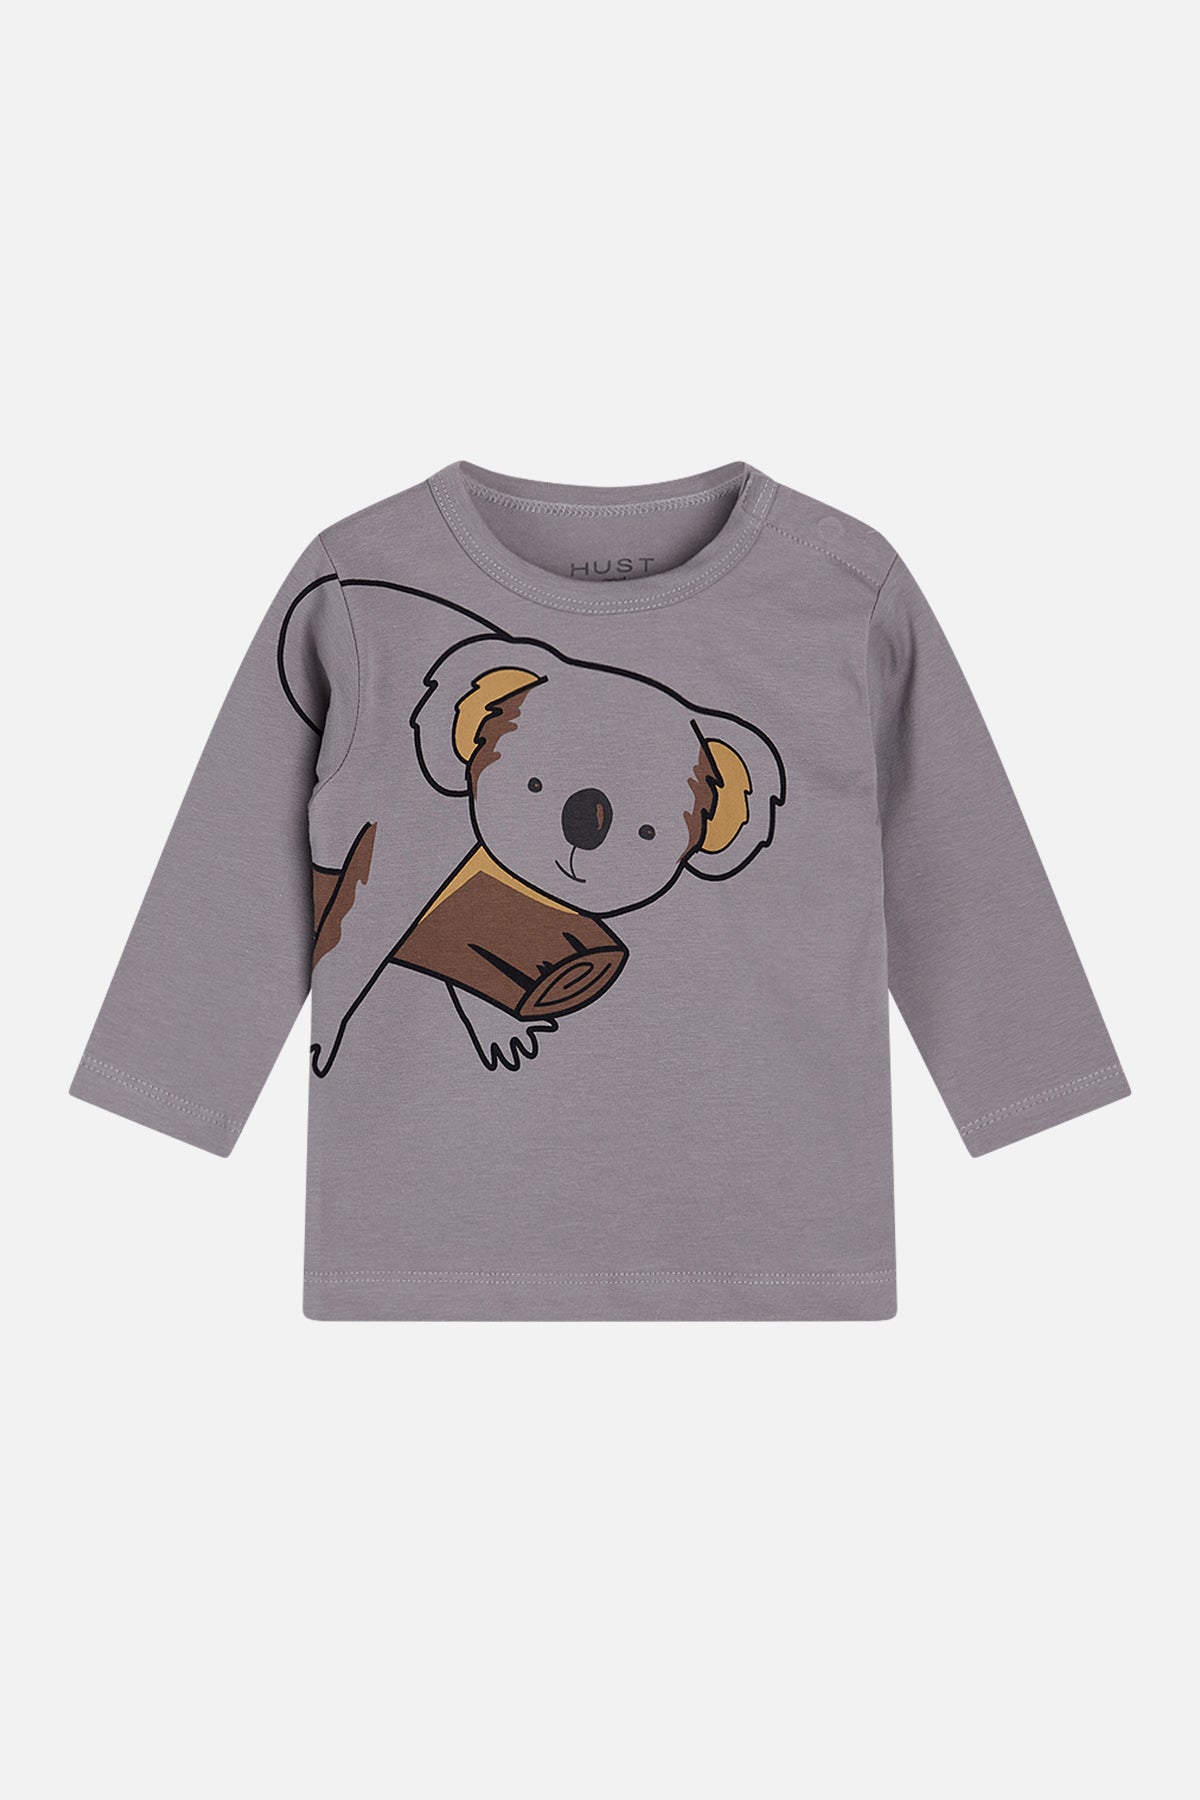 Hust And Claire - August Bluse Koala - Skyrocket